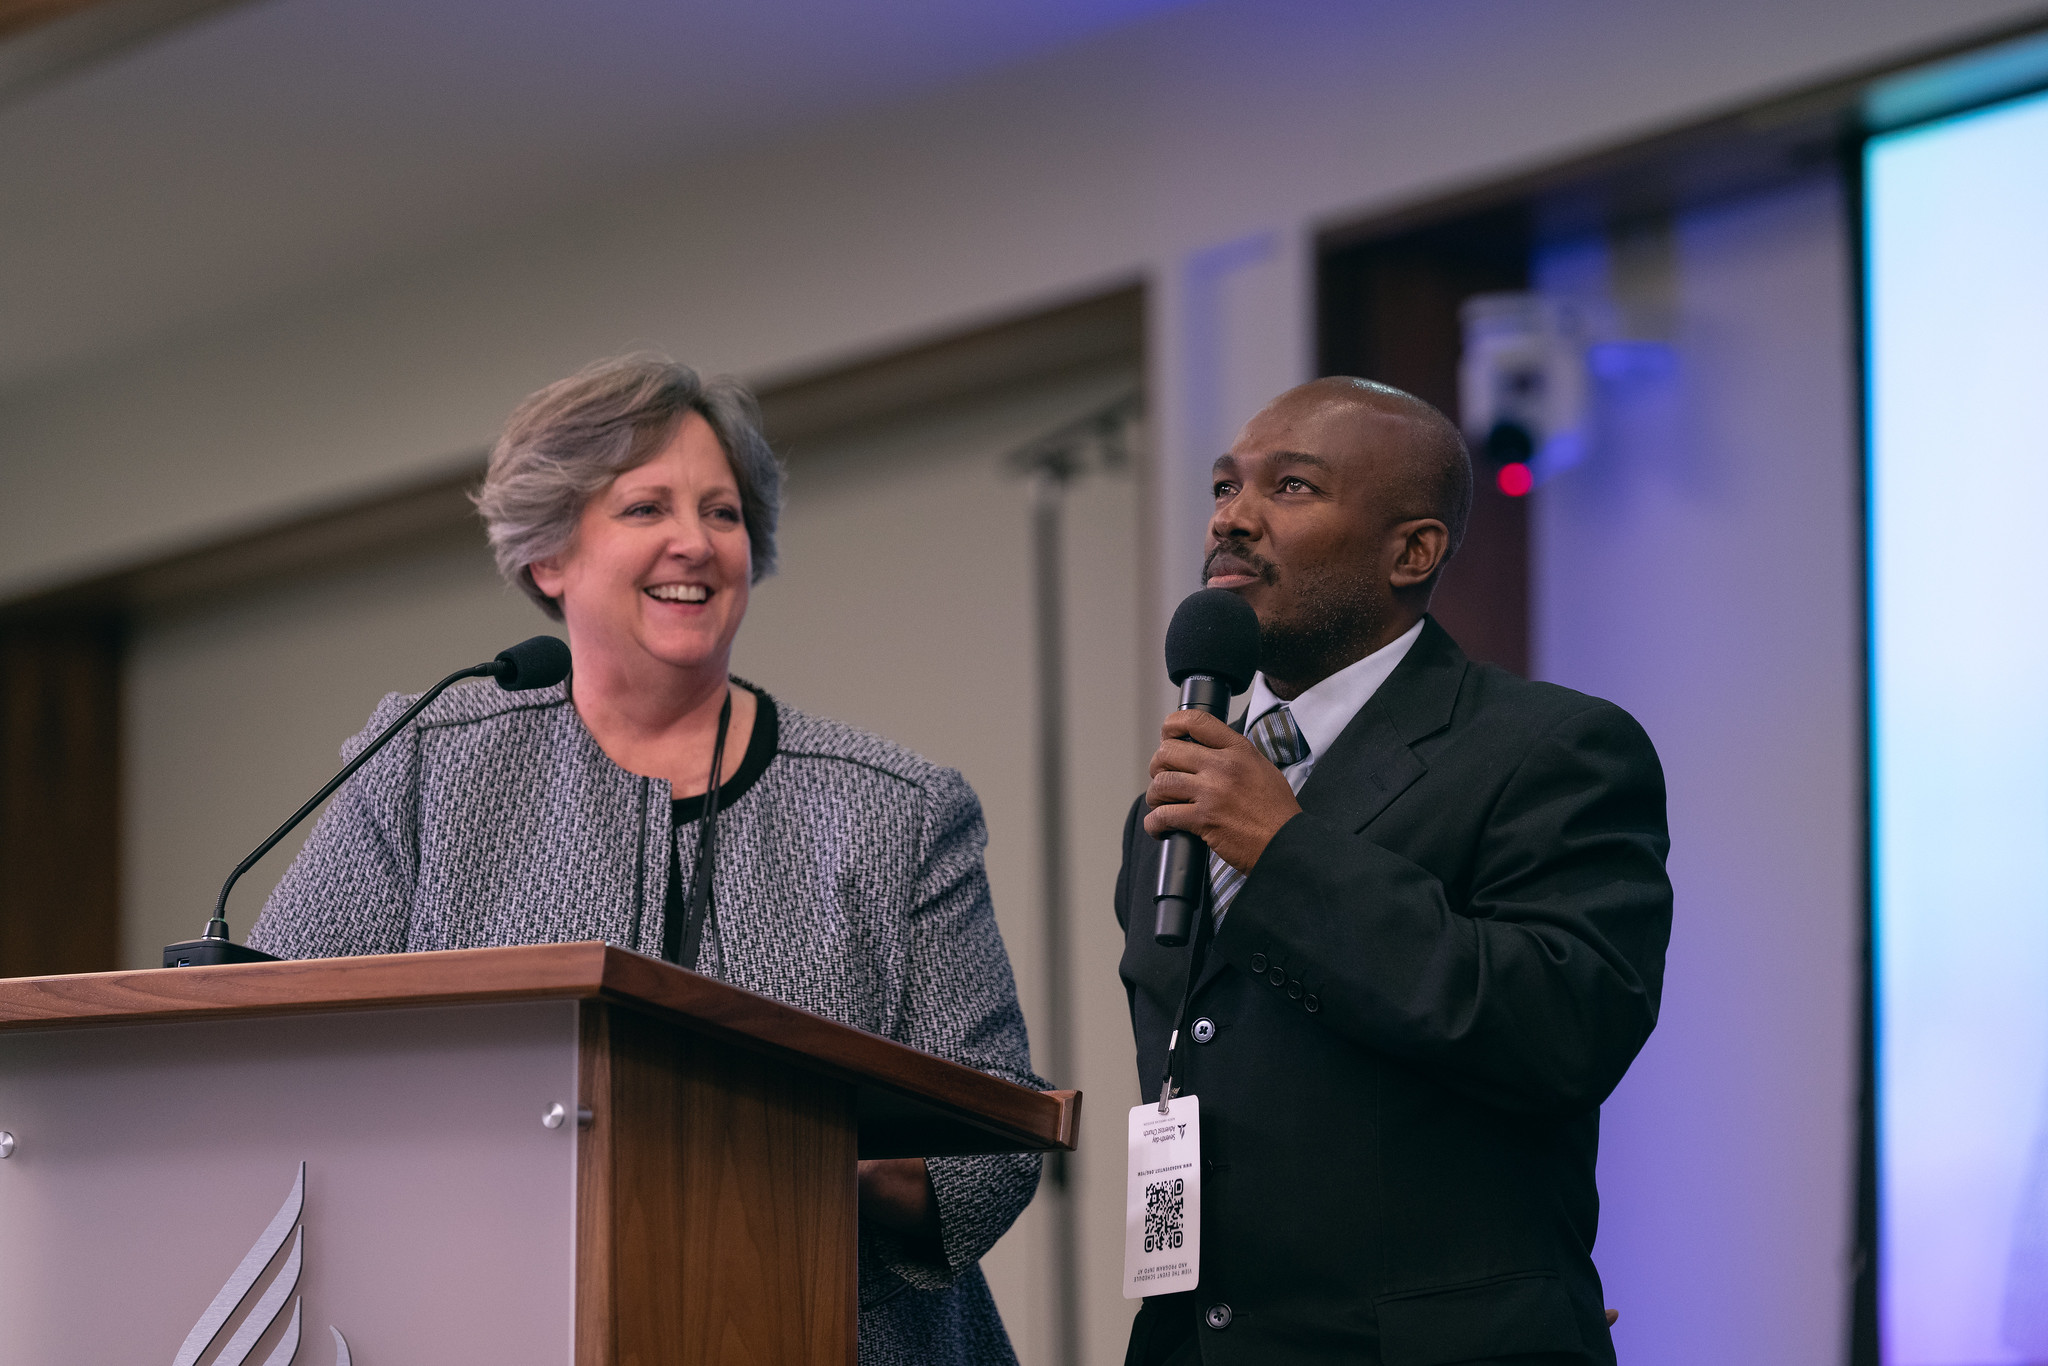 Diane Thurber, Christian Record Services president, listens in while Dexter Thomas, an Adventist motivational speaker, shares how CRS resources have had a major impact in his life.